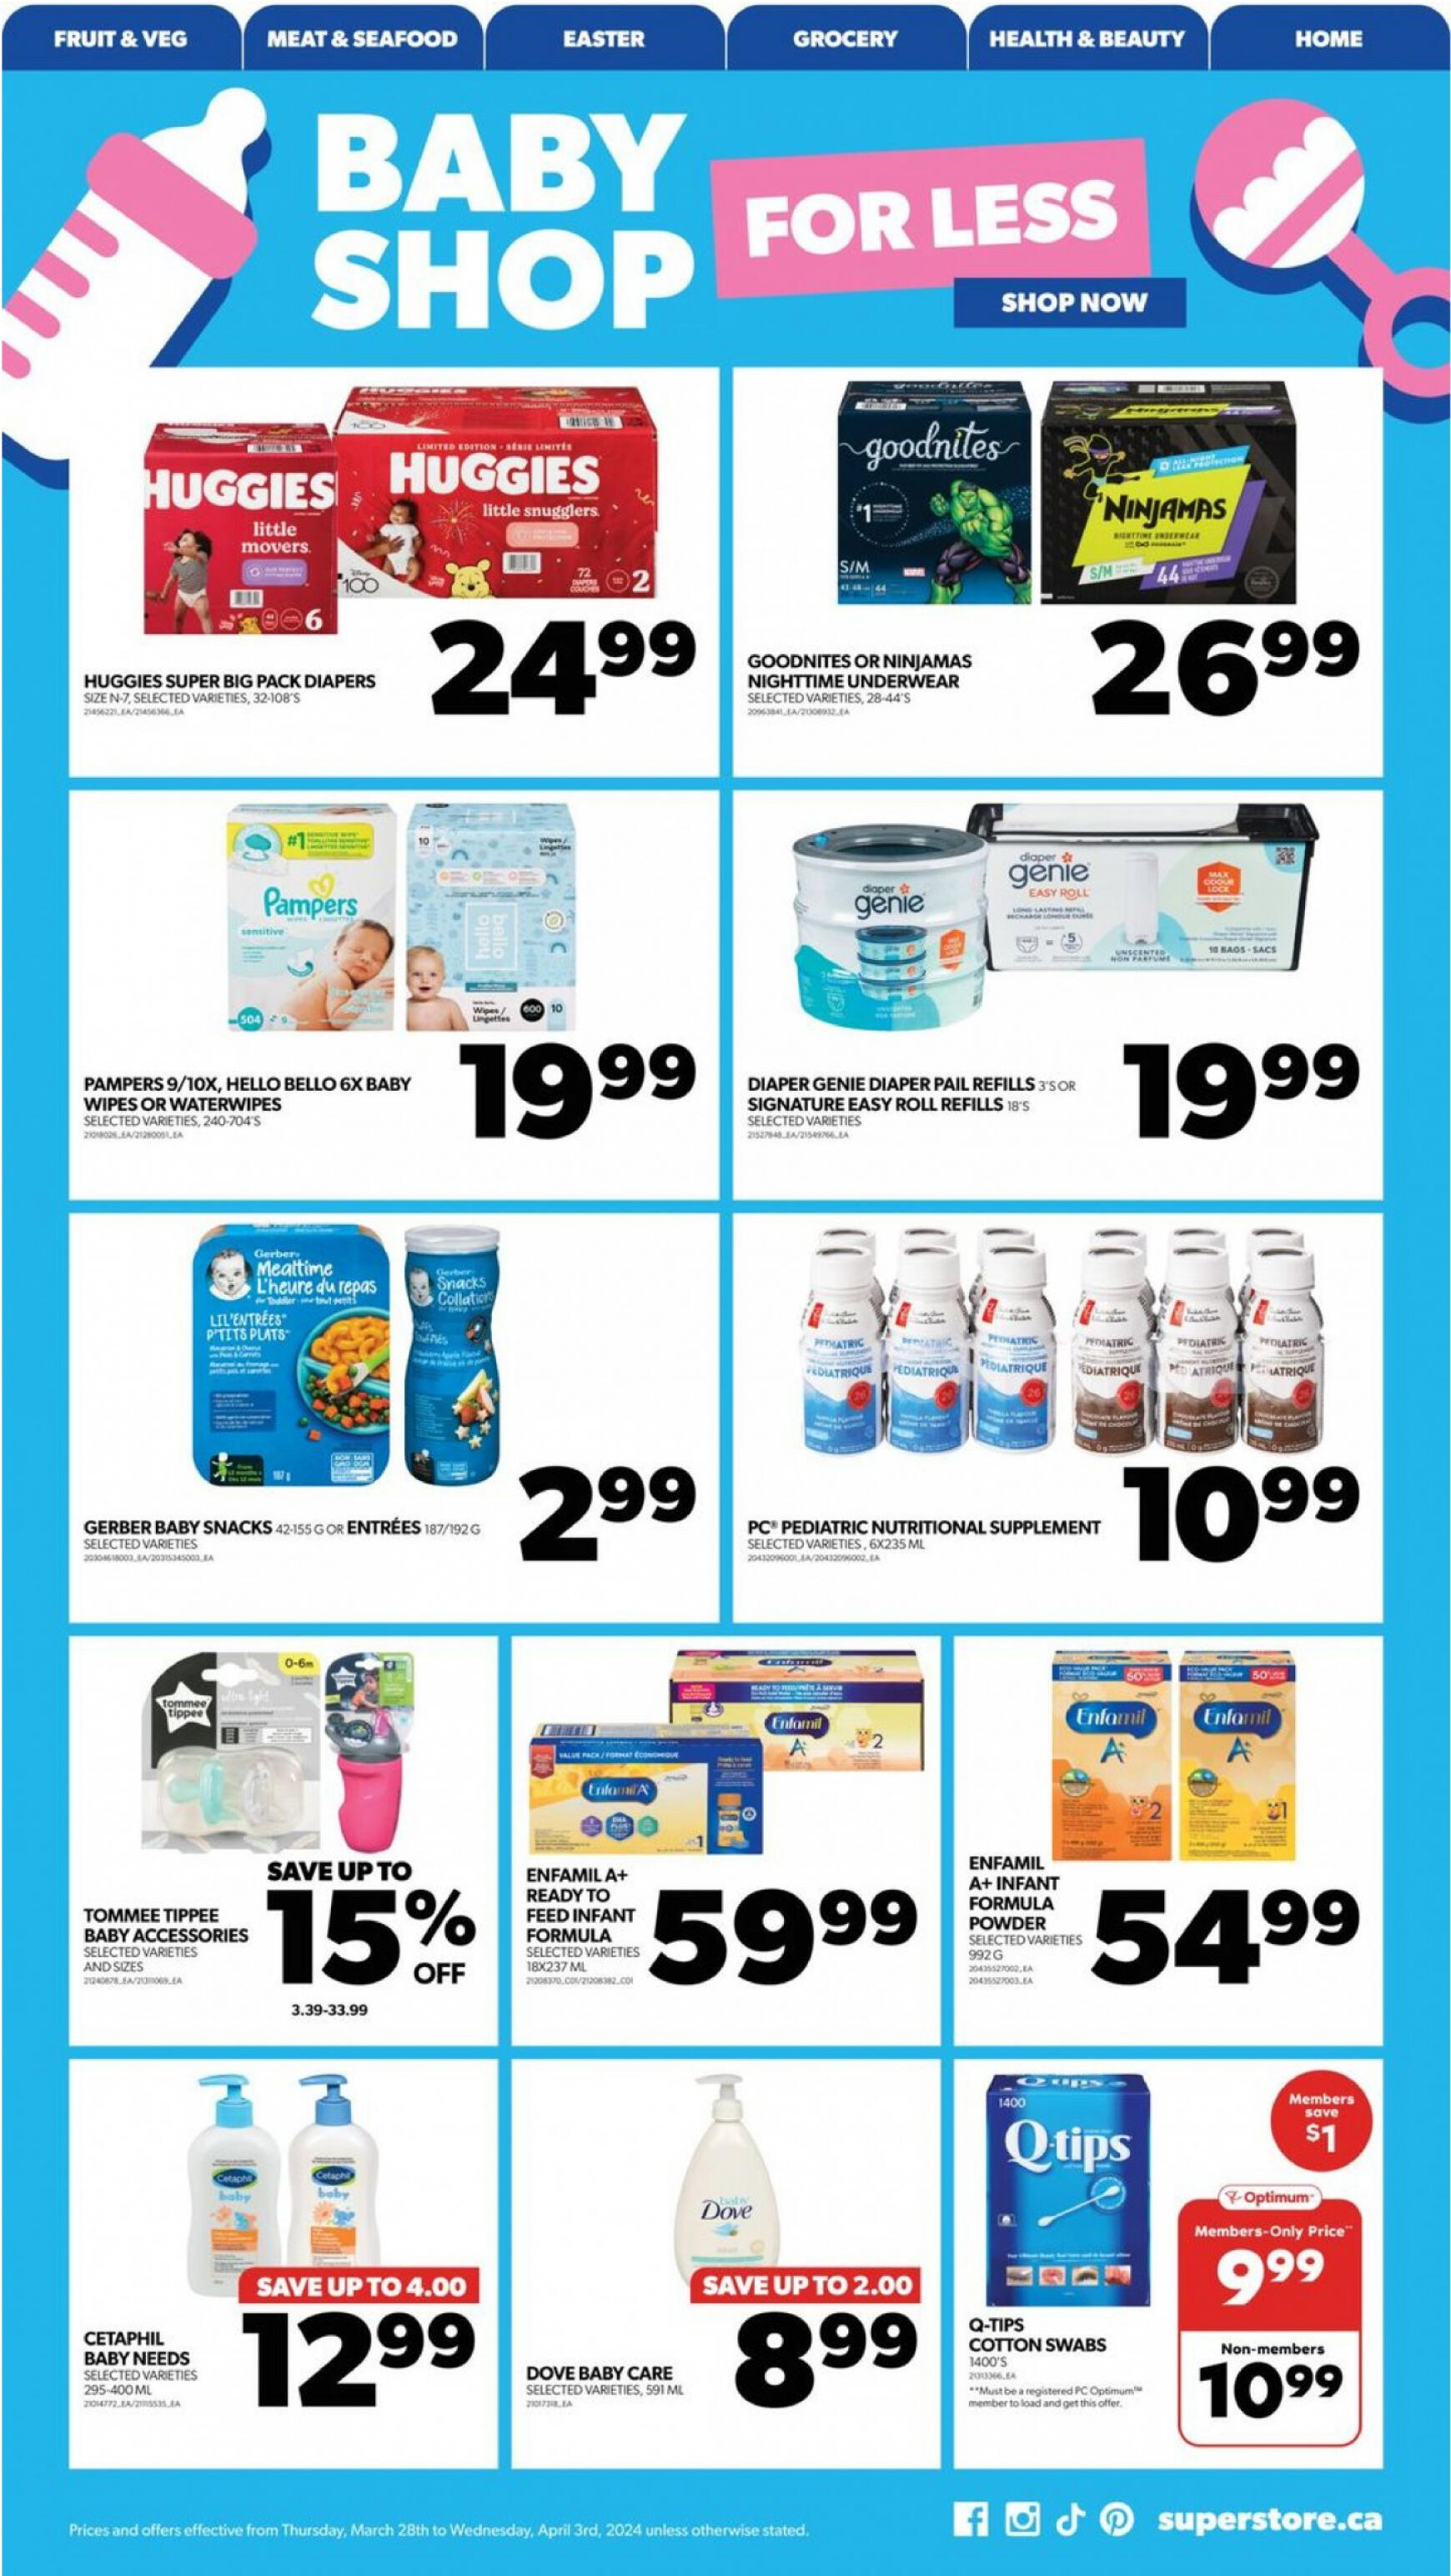 real-canadian-superstore - Real Canadian Superstore flyer current 28.03. - 03.04. - page: 25